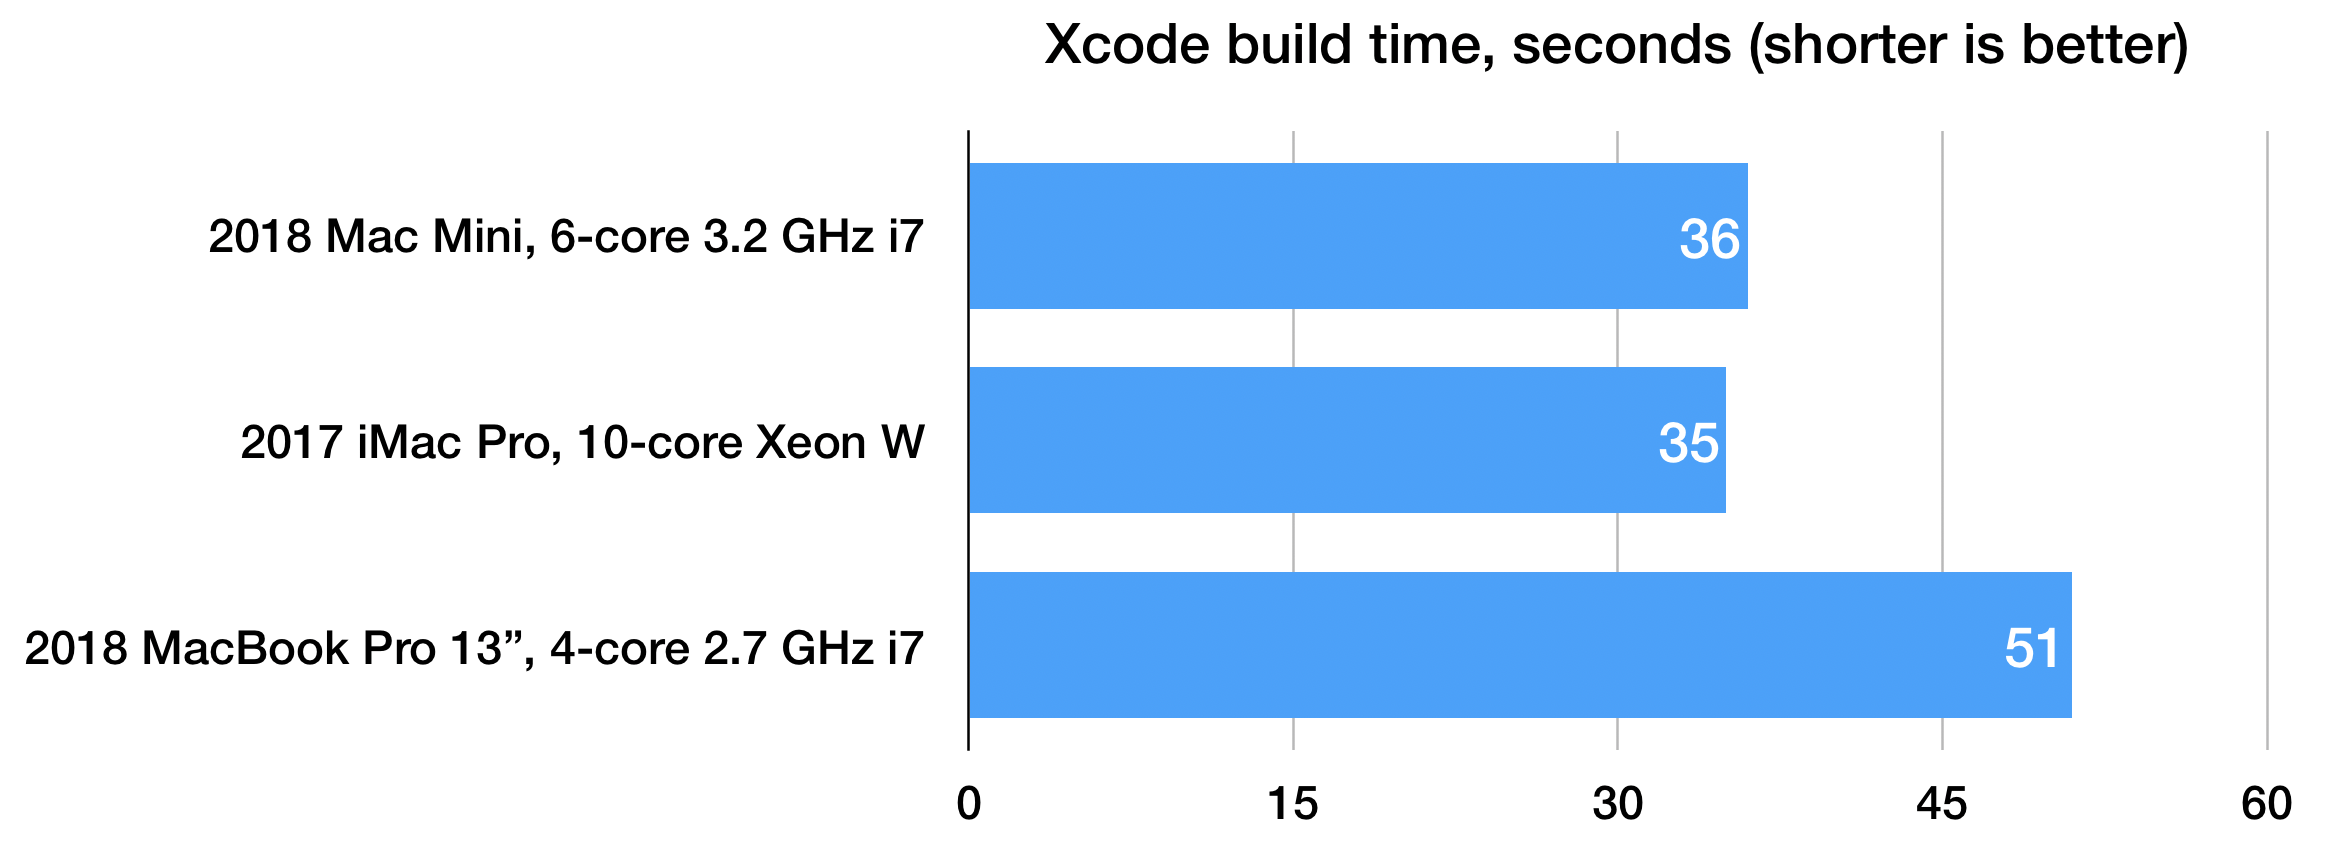 is a 2014 mac mini good enough for xcode 8